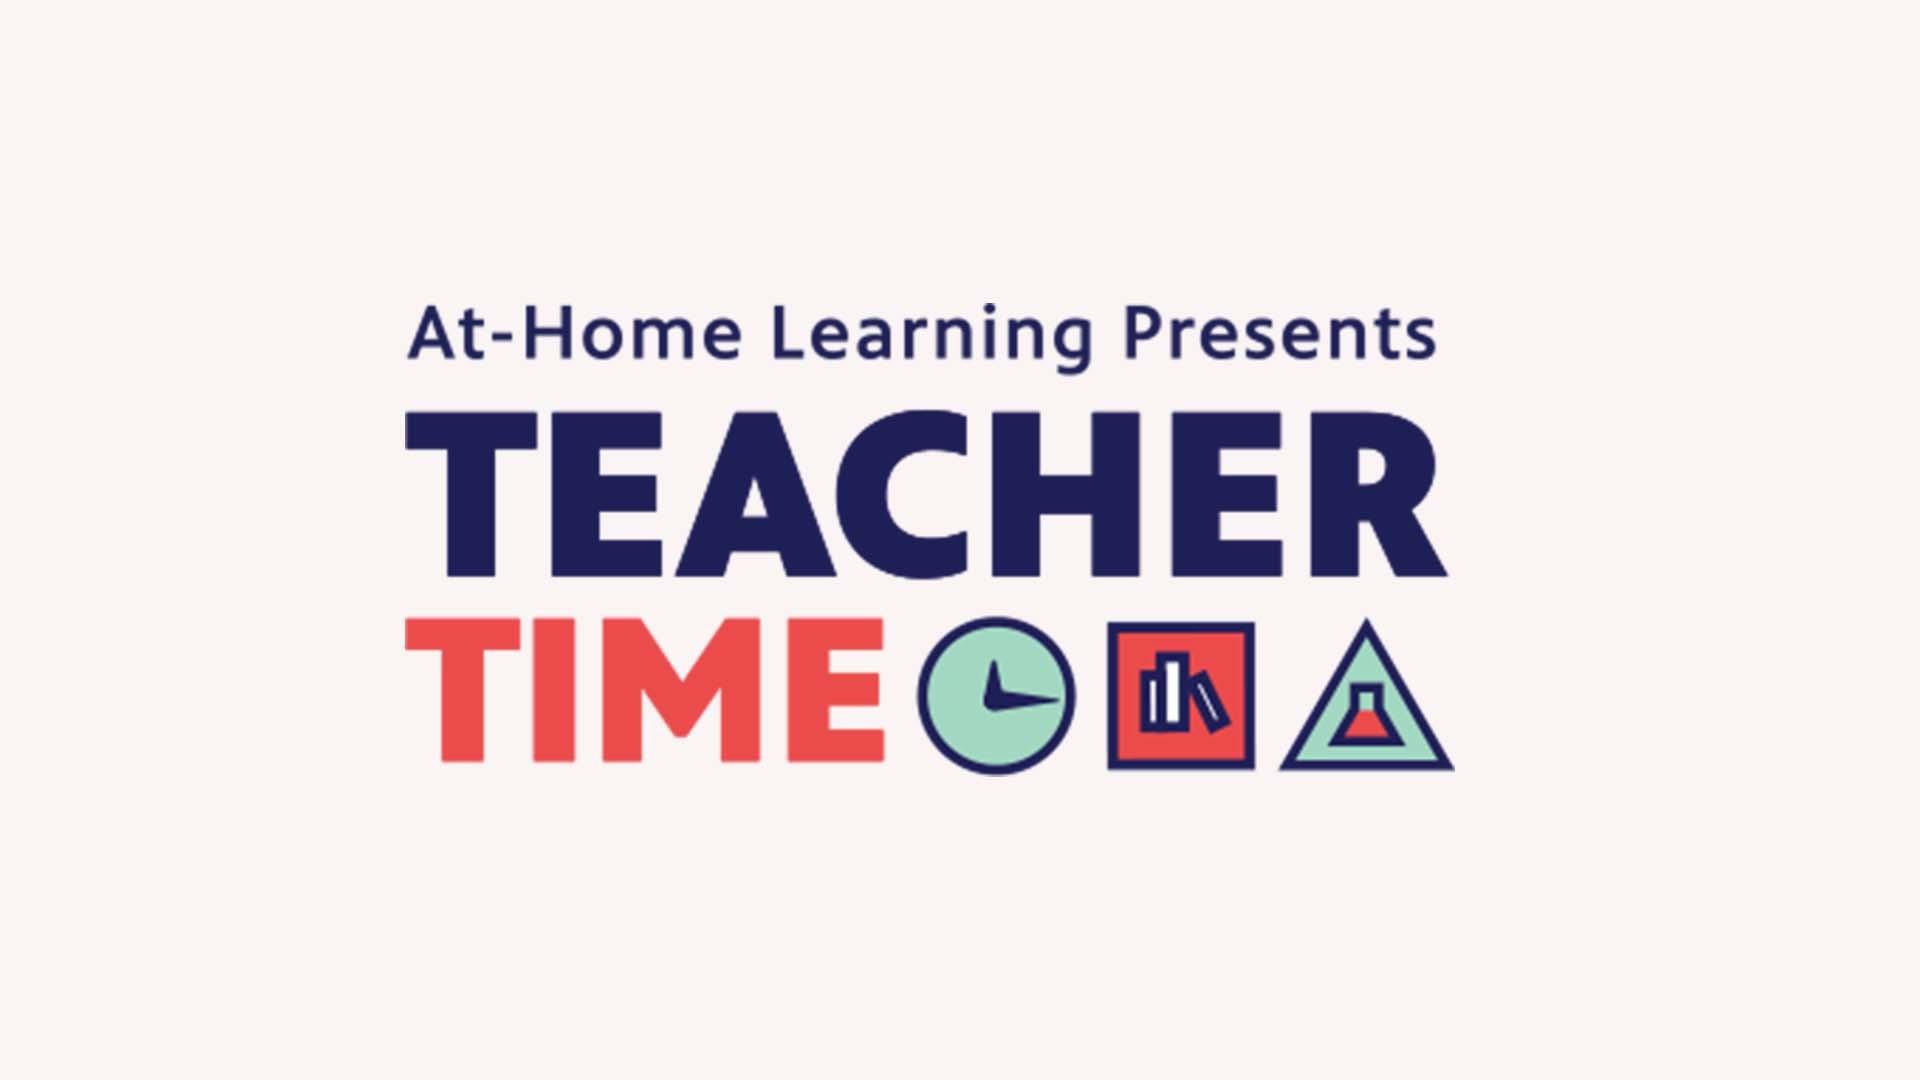 At-Home Learning Presents Teacher Time